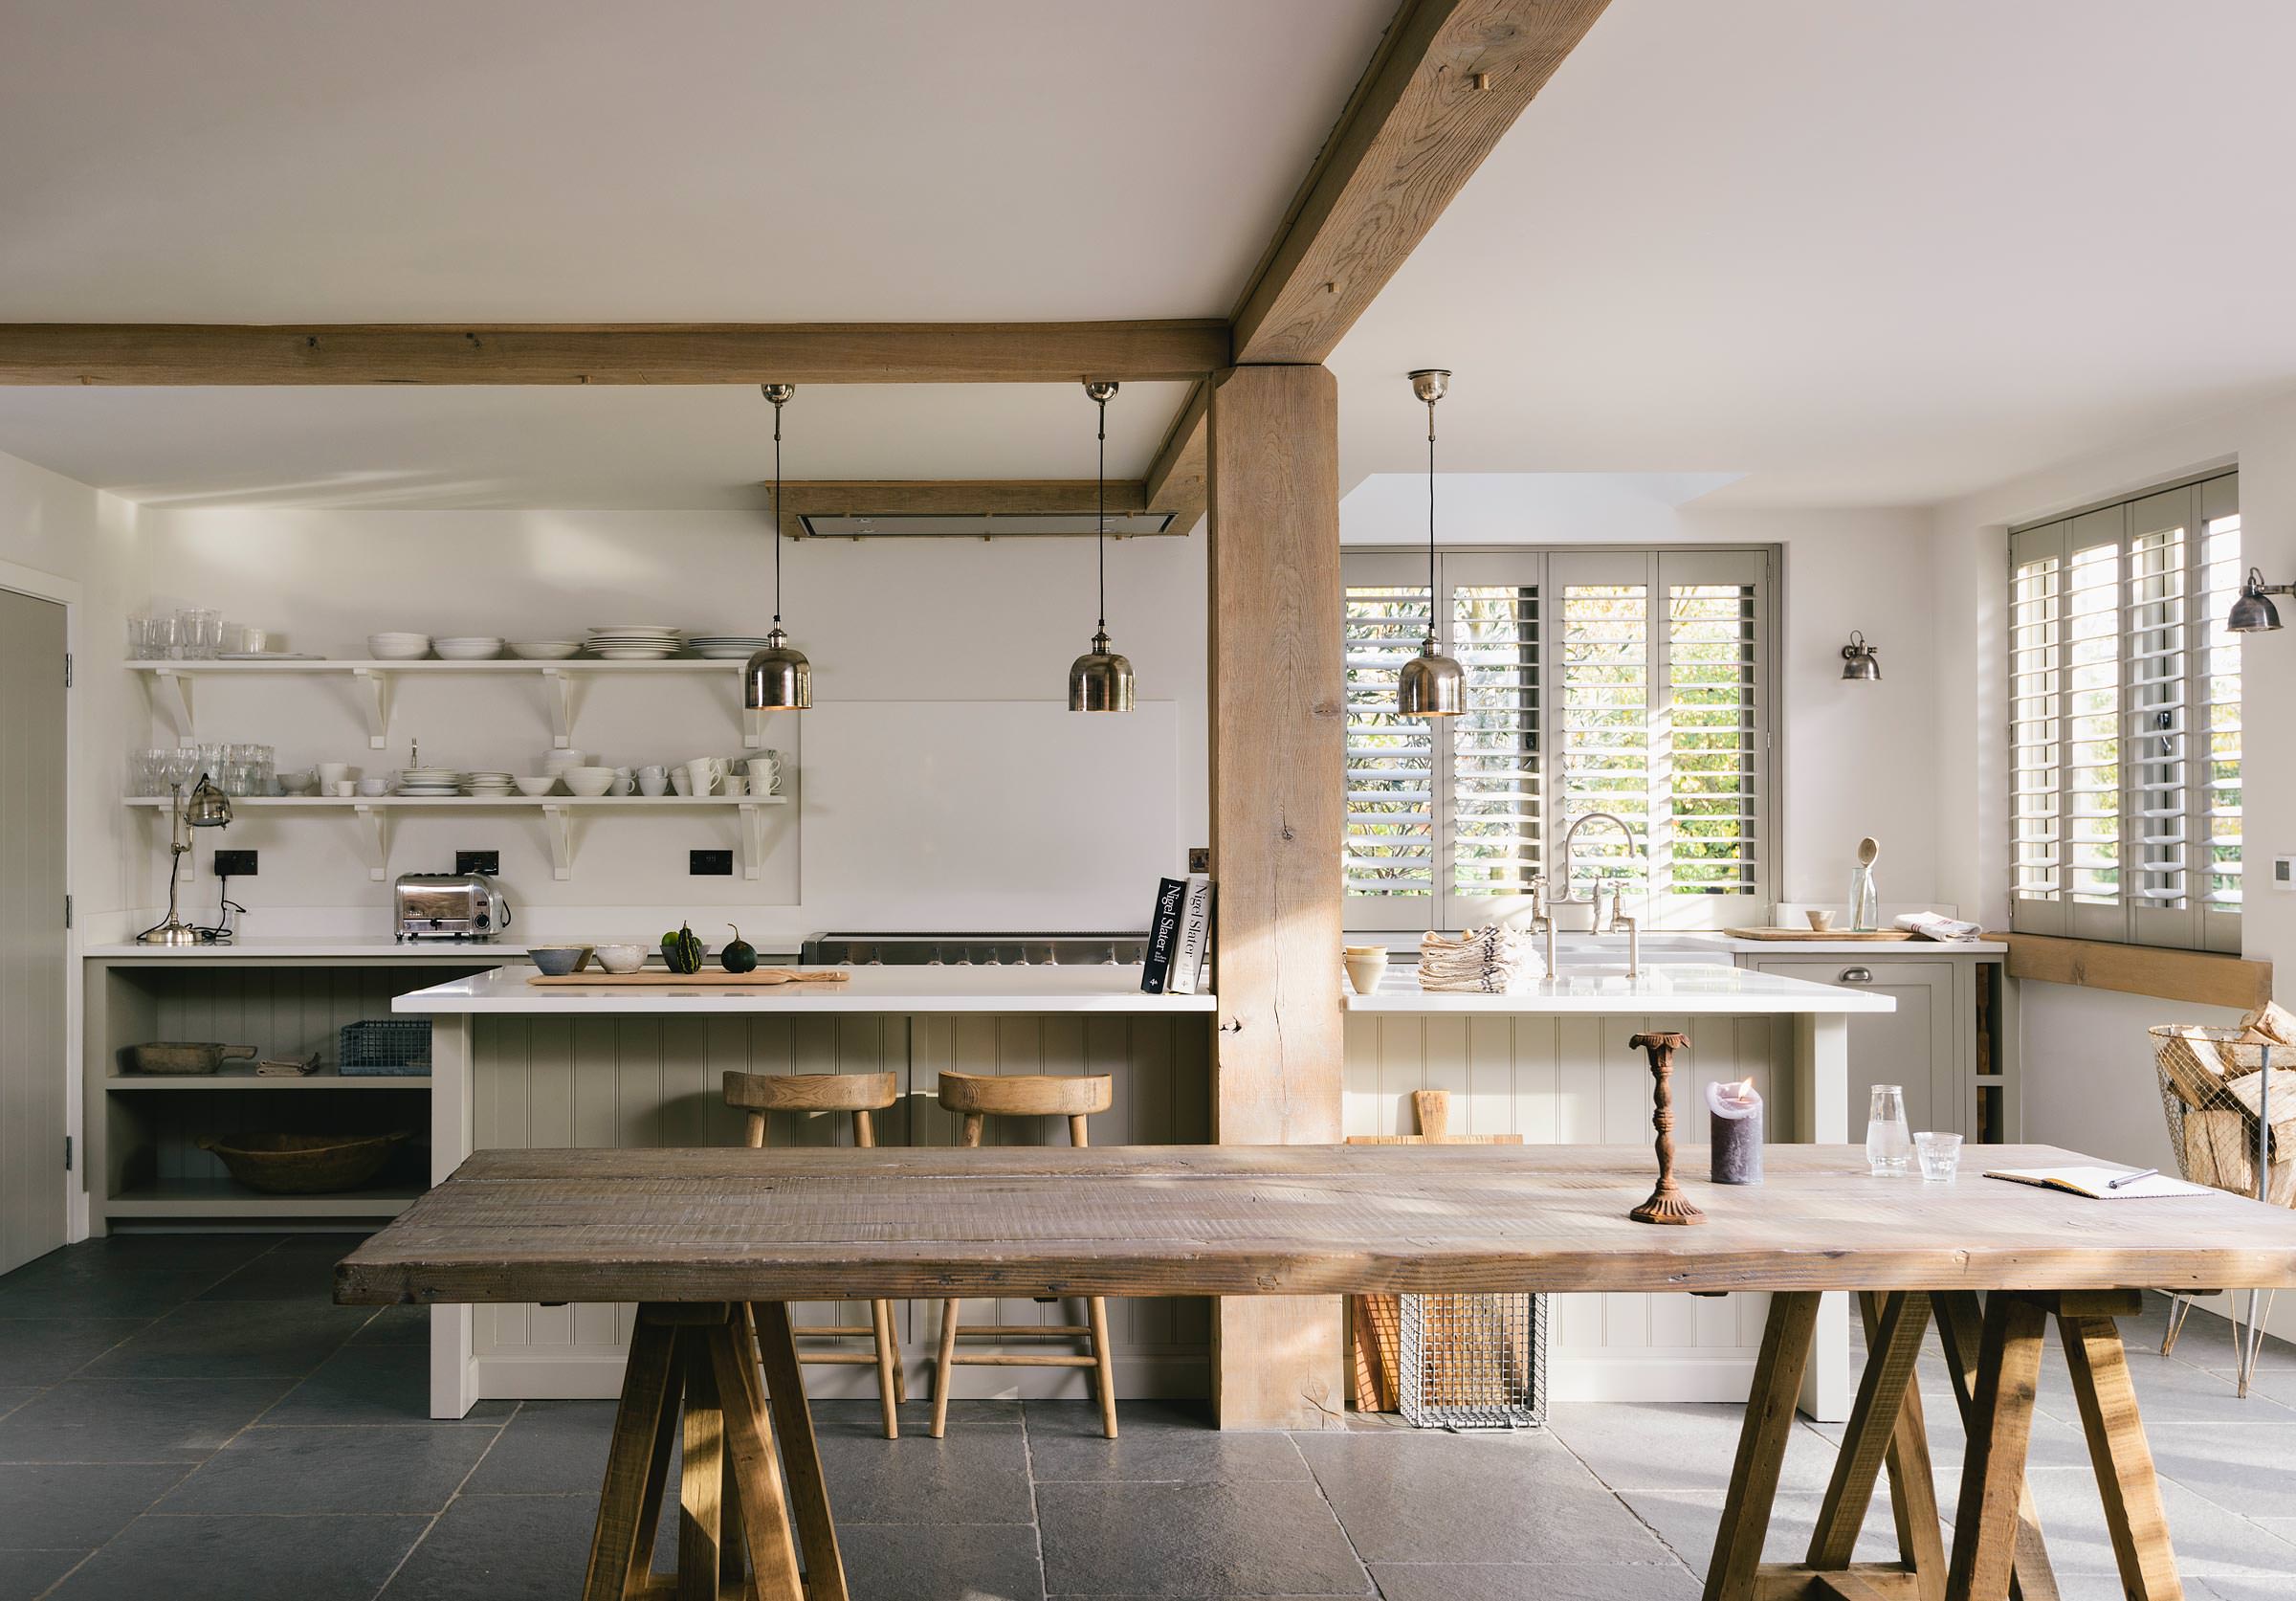 Our latest photoshoot… The Henley on Thames Kitchen